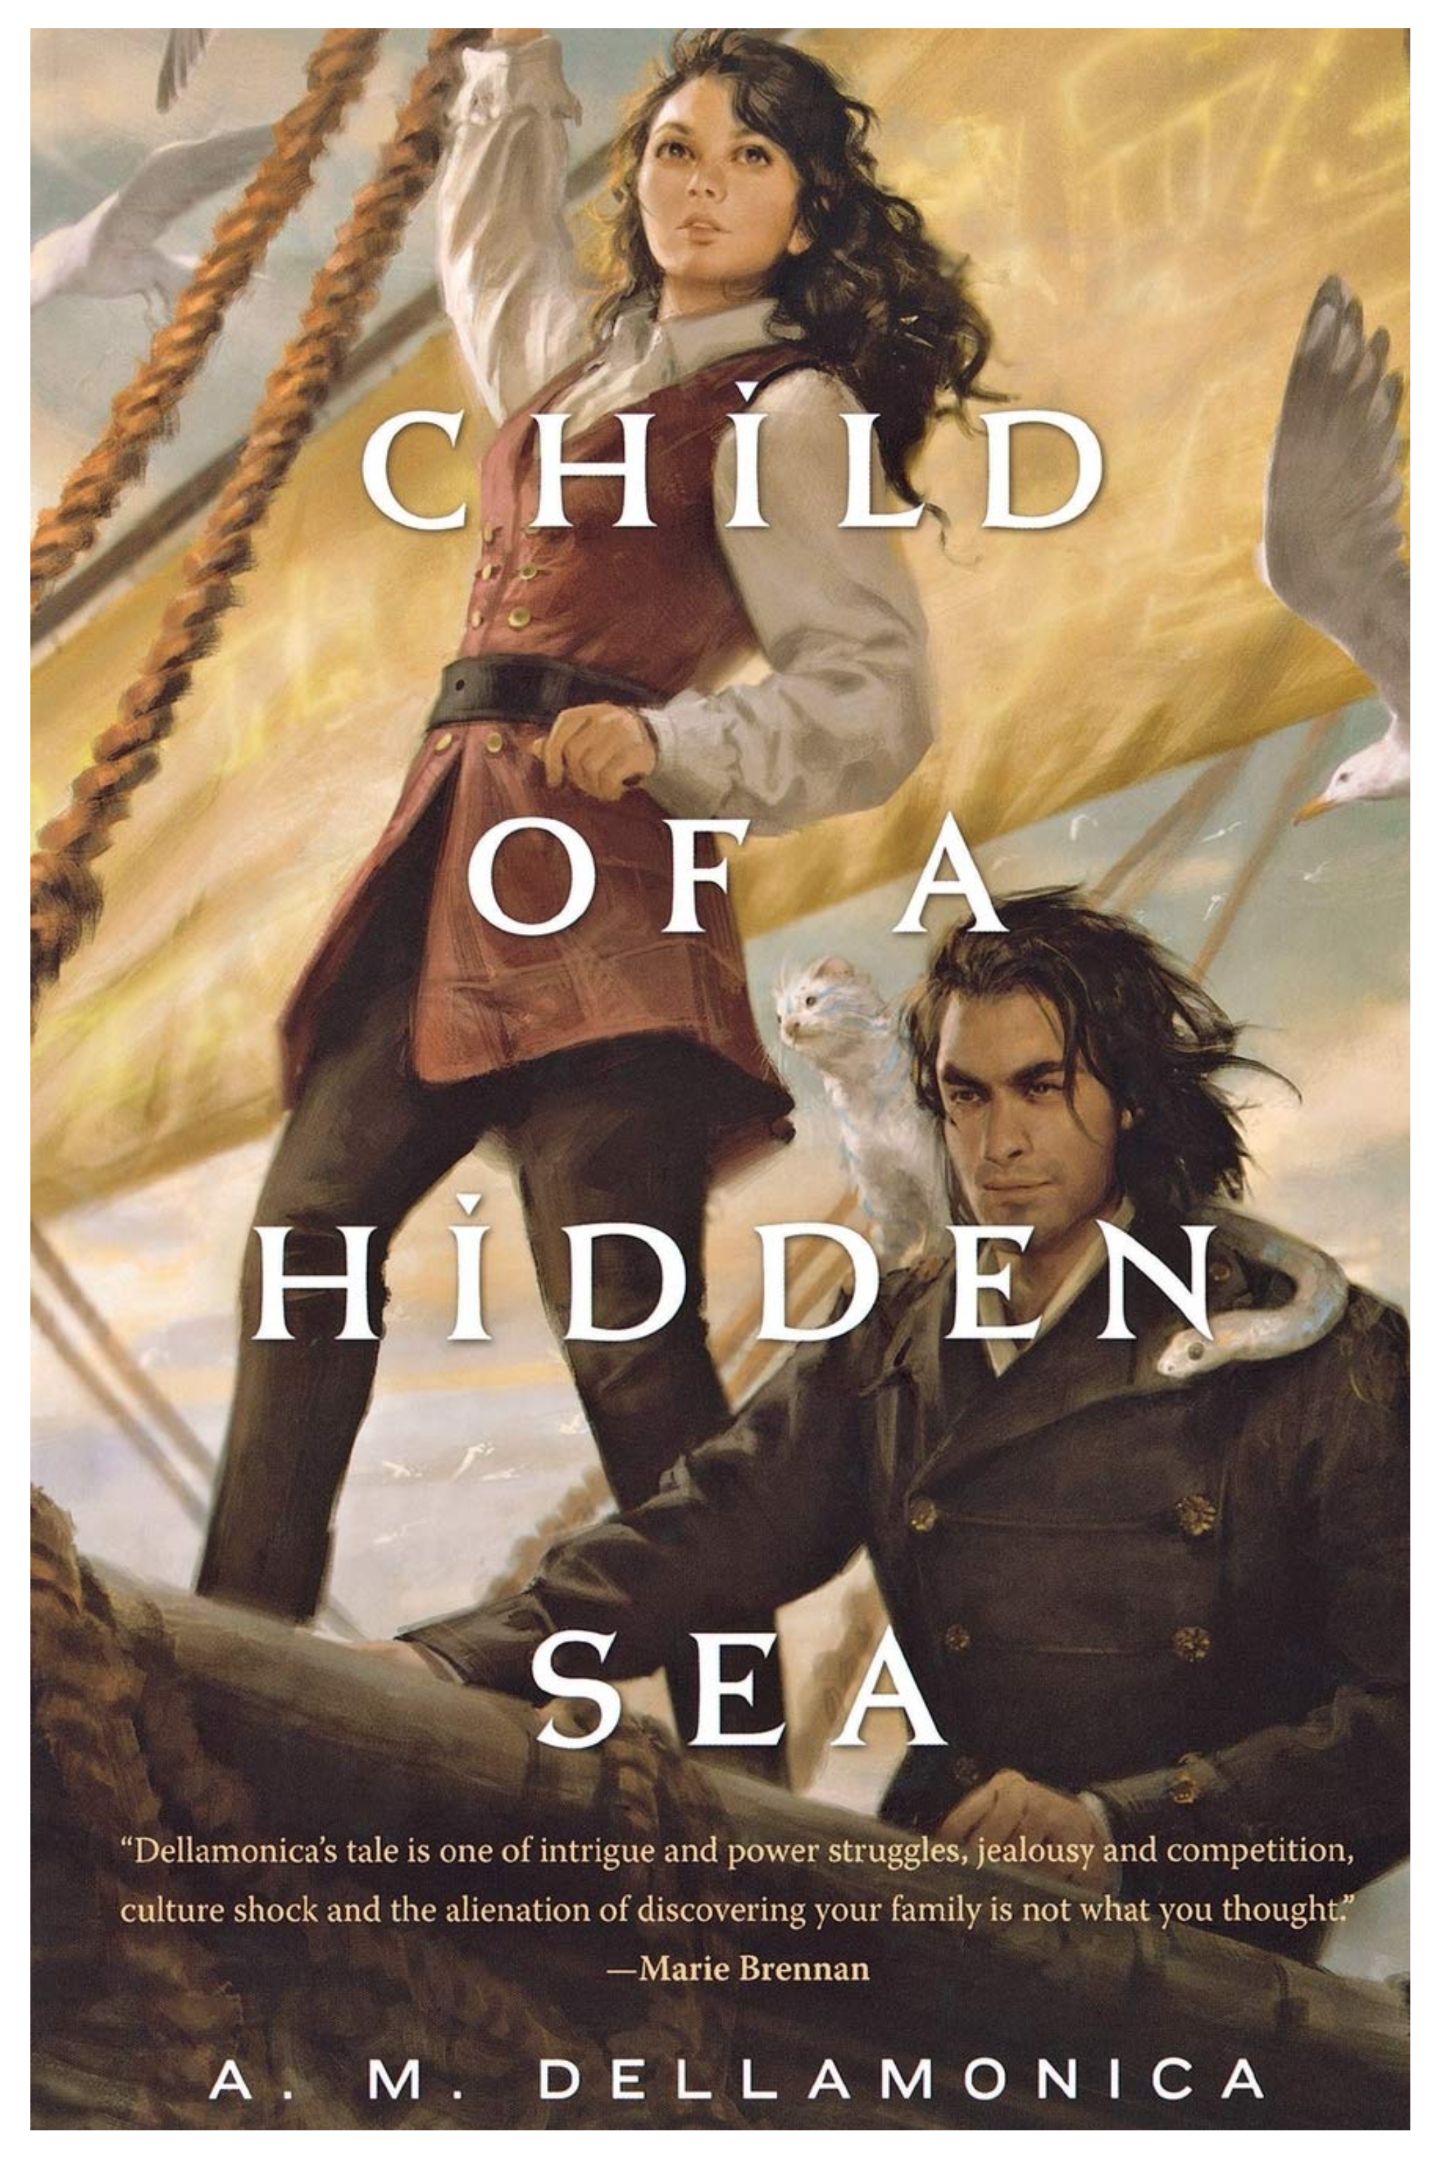 10 Books to Read While Playing Sea of Thieves